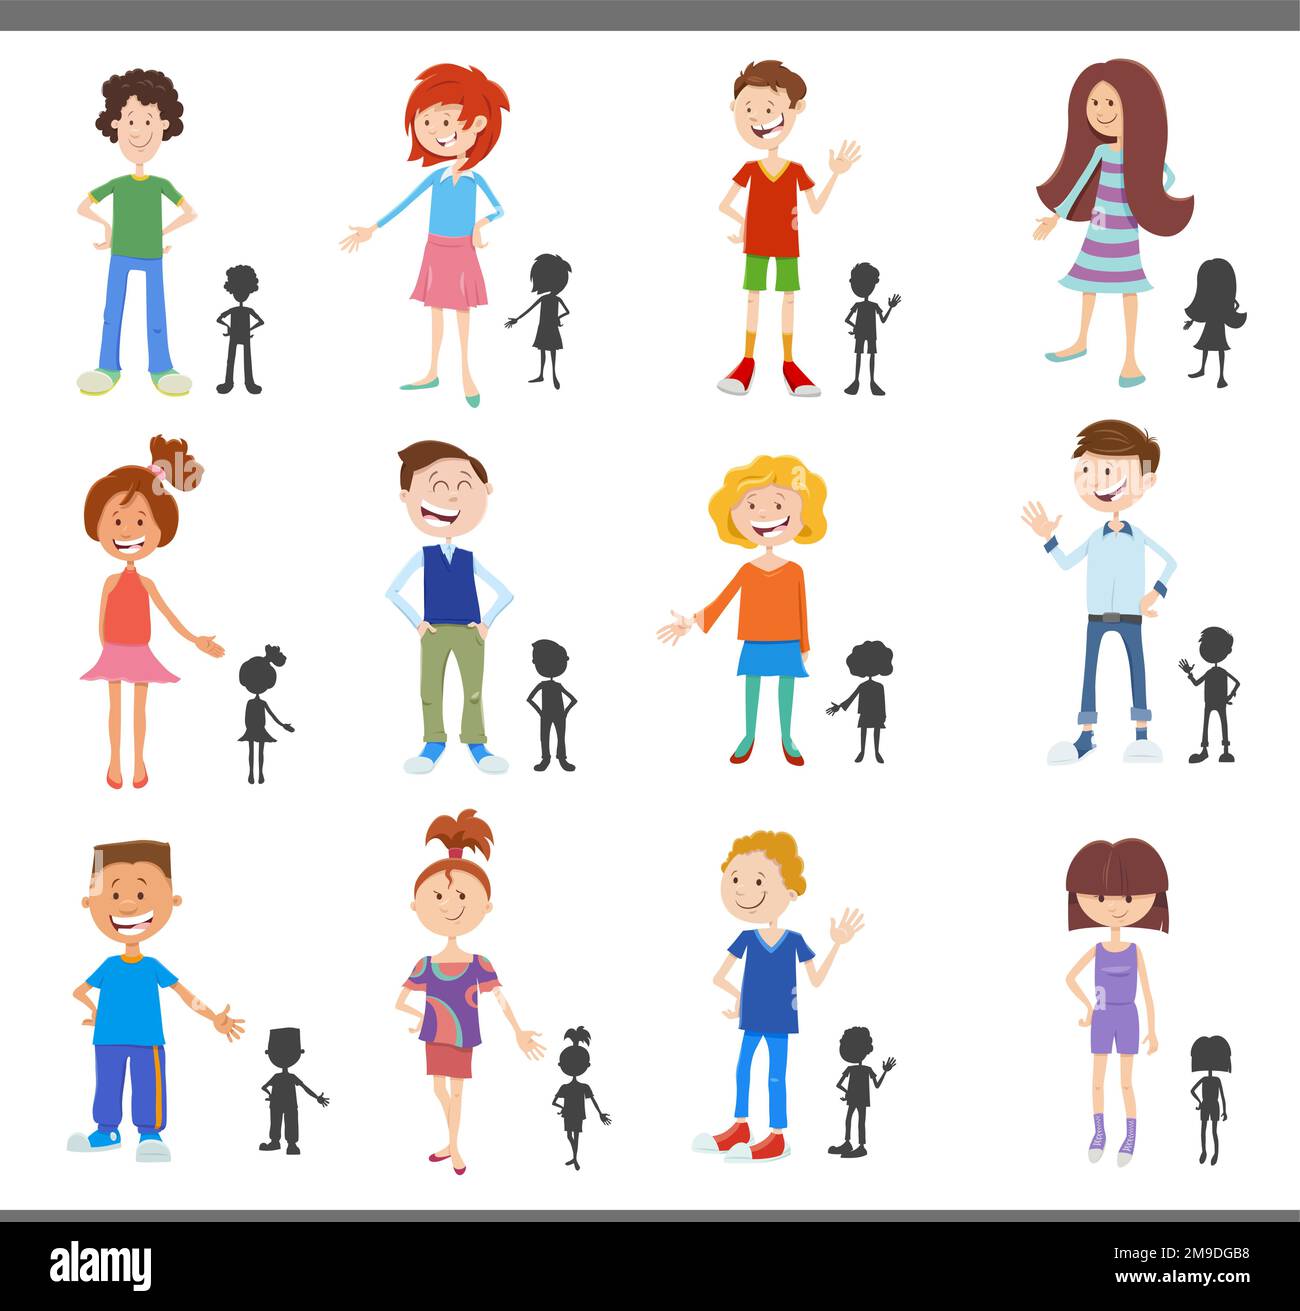 Cartoon illustration of happy children and teenagers comic characters with silhouettes set Stock Vector